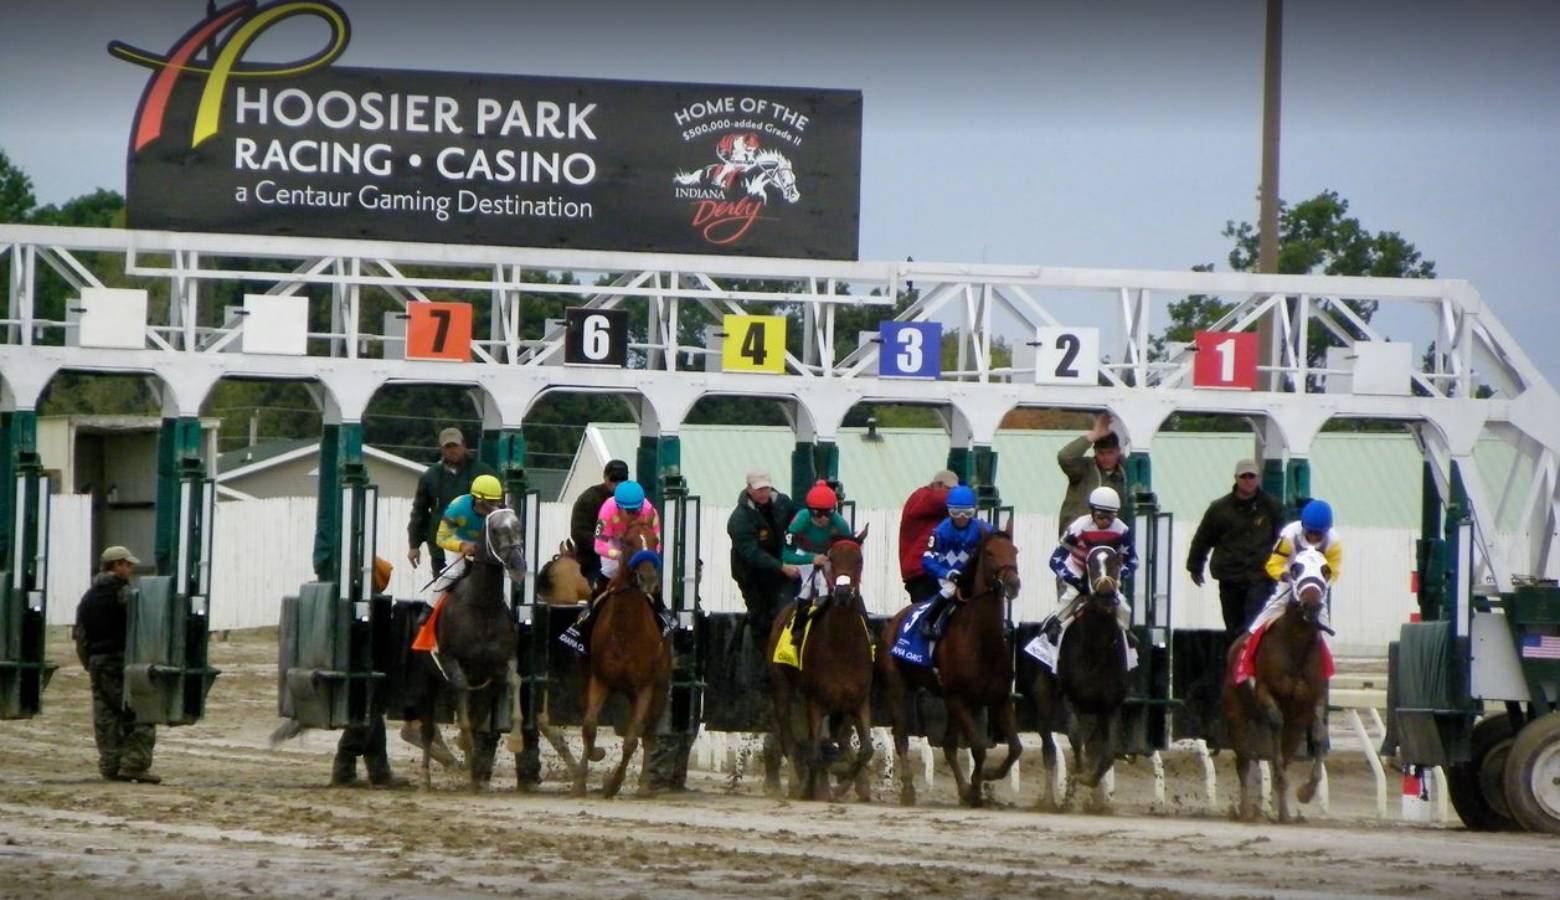 Anderson’s Hoosier Park Now Belongs To Largest US Casino Company